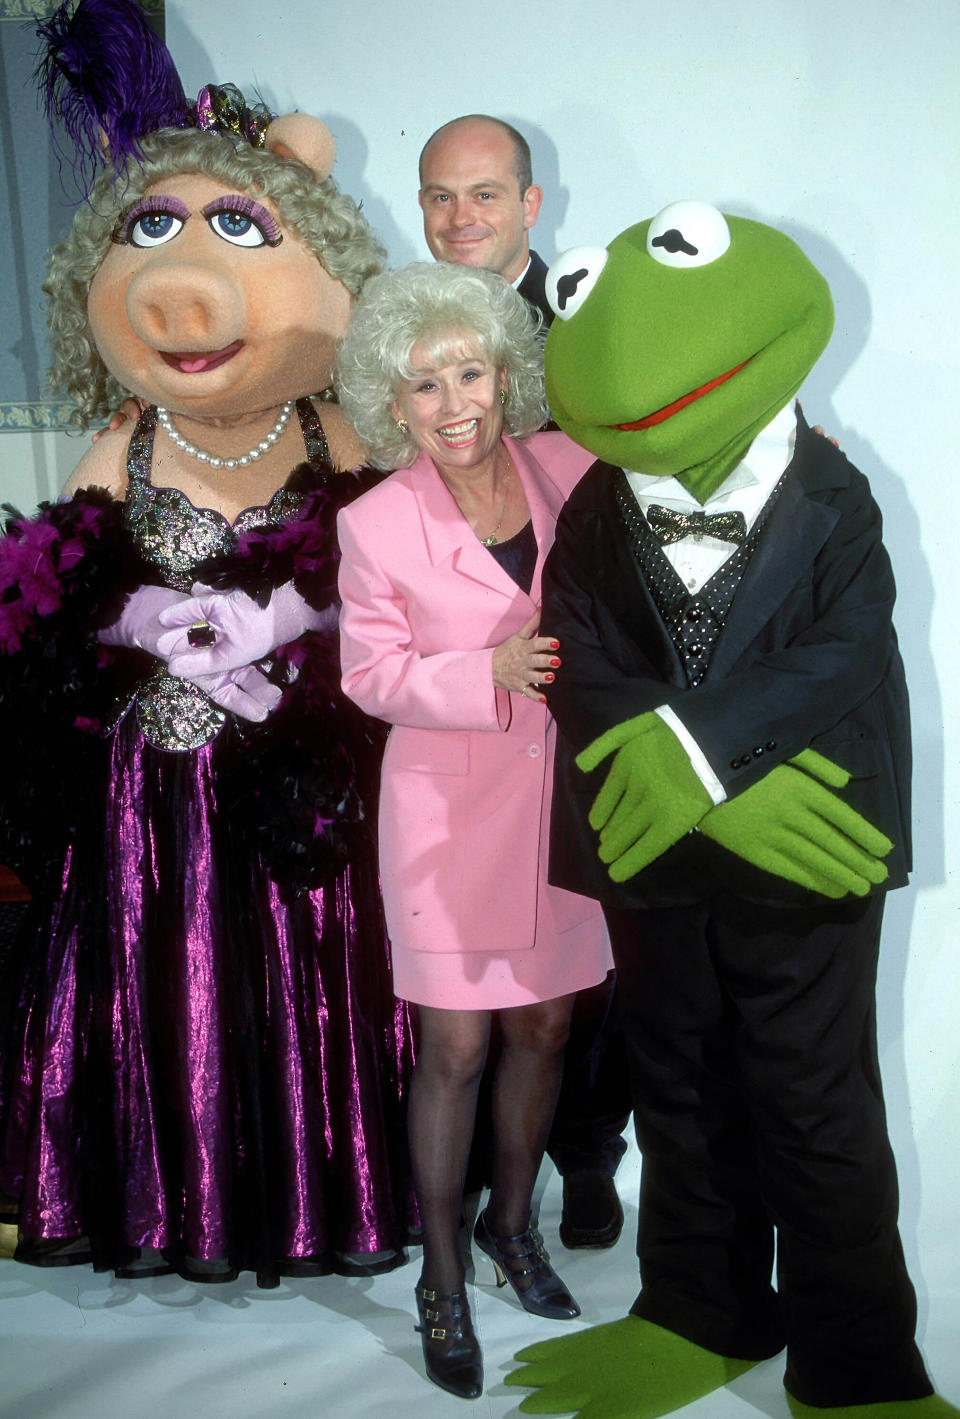 English actors Barbara Windsor and Ross Kemp from the television soap 'Eastenders' meet Miss Piggy and Kermit The Frog from 'The Muppet Show', 1996. (Photo by Larry Ellis Collection/Getty Images)